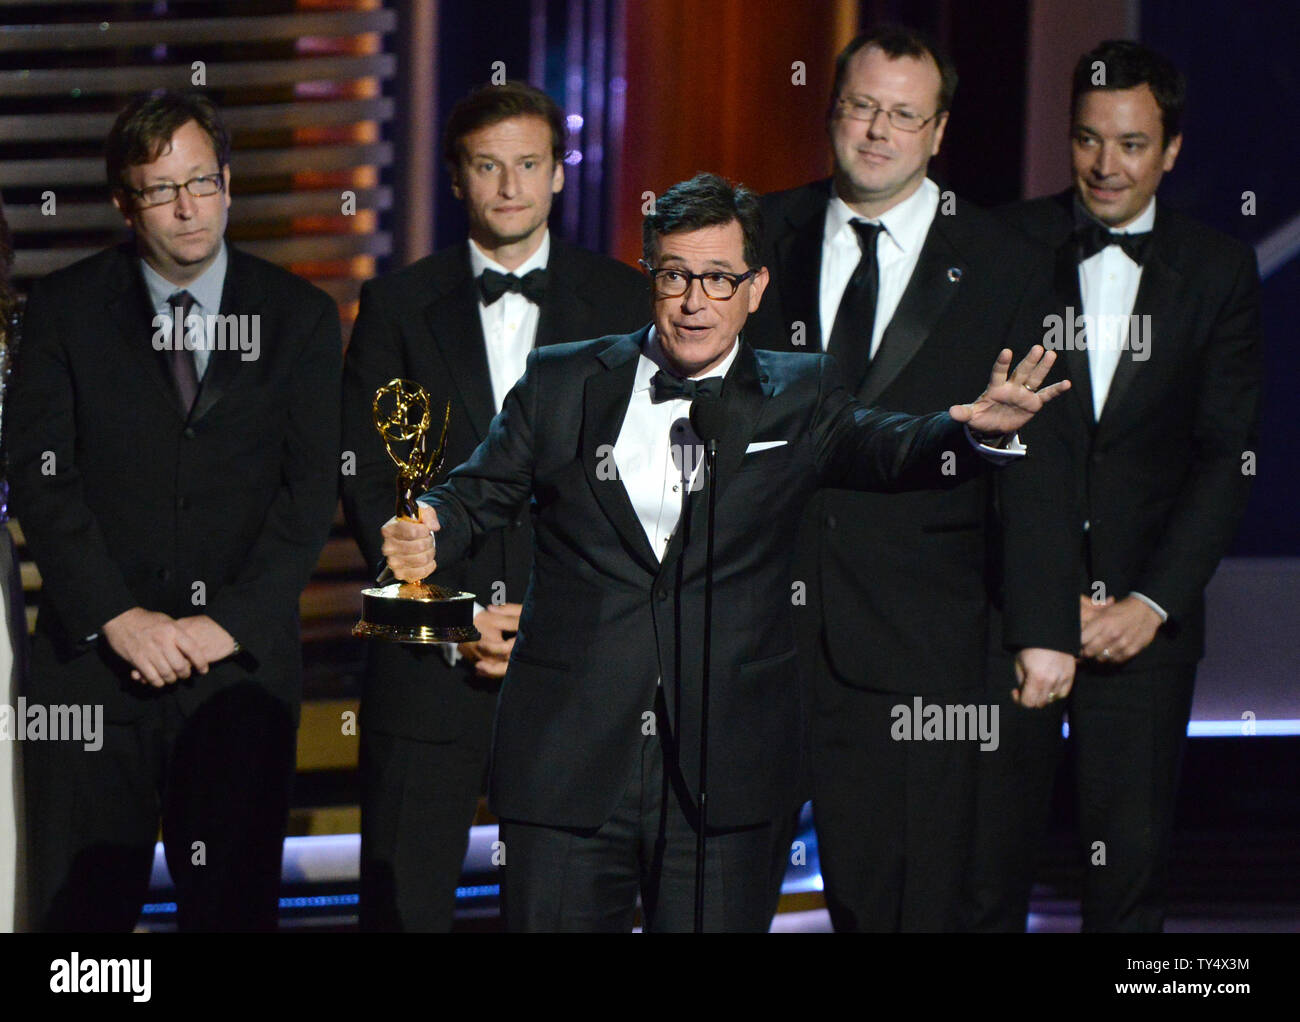 Stephen Colbert and the producers of 'The Colbert Report' accept the award for outstanding variety series  during the Primetime Emmy Awards at the Nokia Theatre in Los Angeles on August 25, 2014.     UPI/Pat Benic Stock Photo